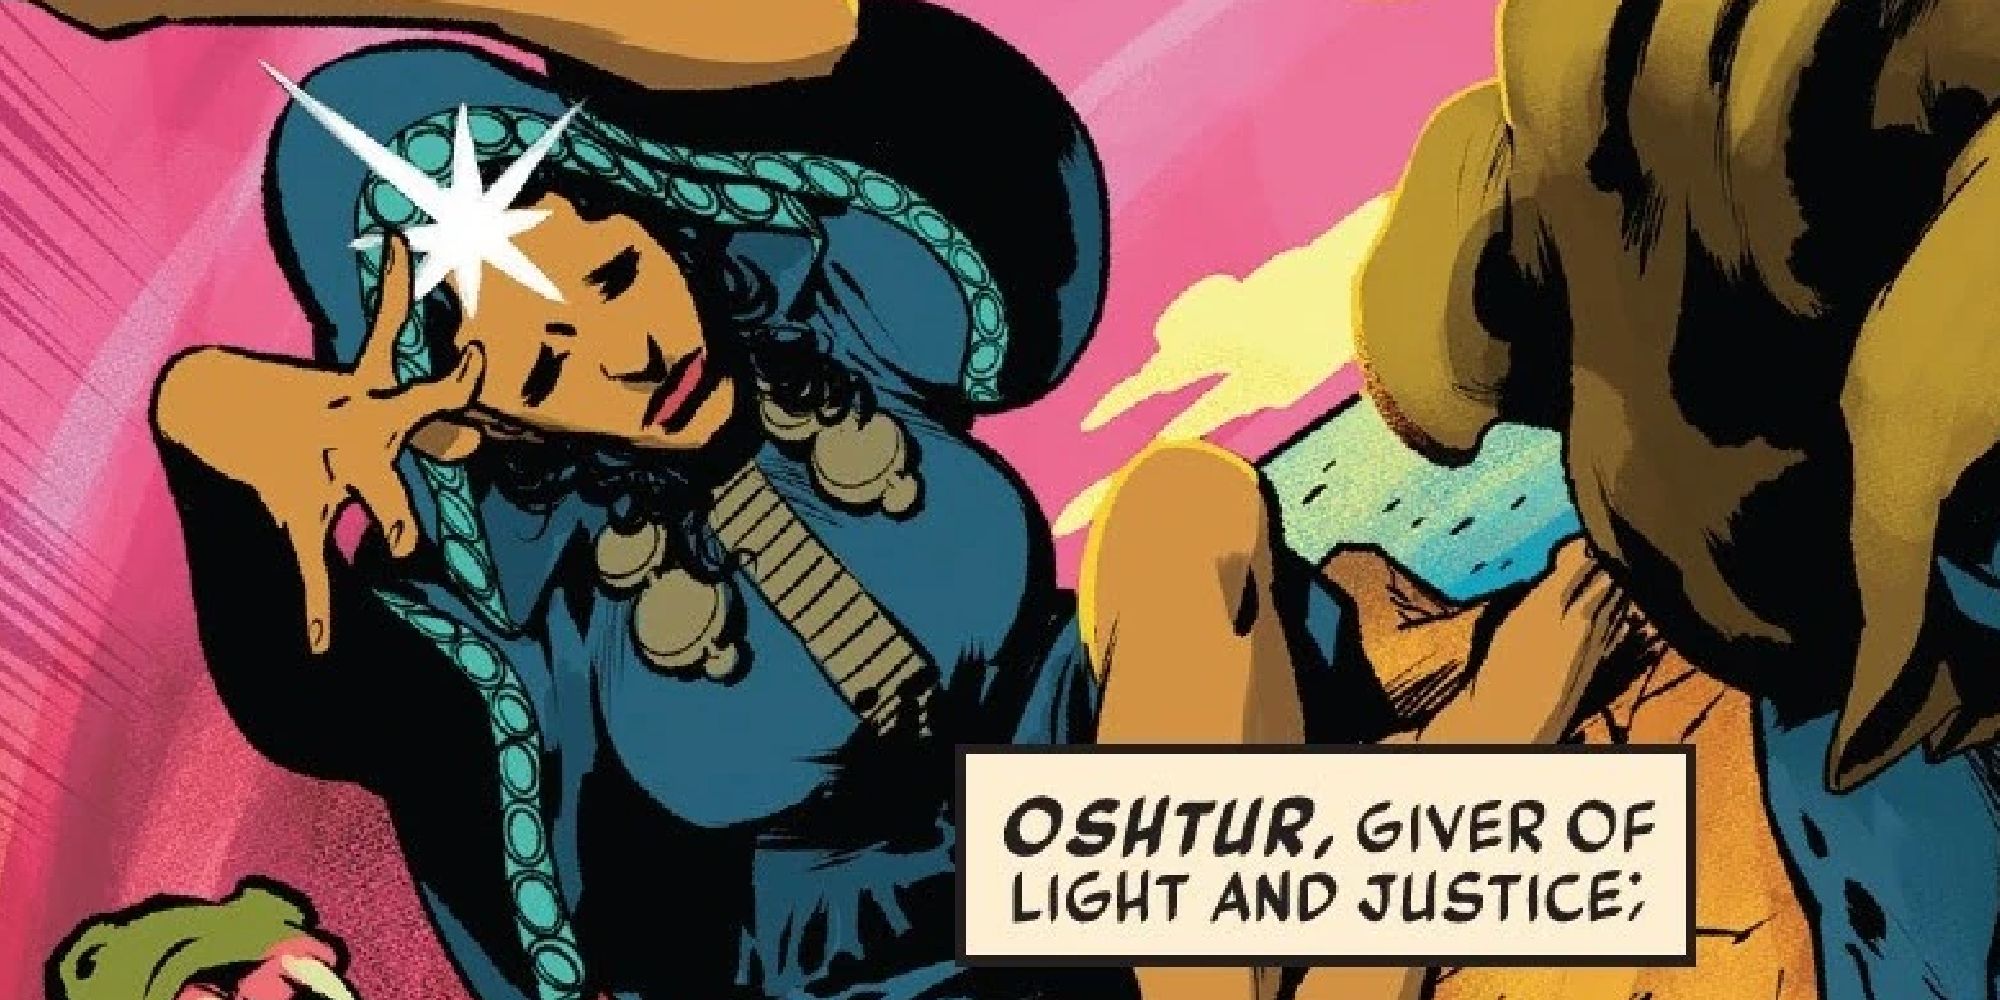 Oshtur, giver of light and justice, appearing in Marvel Comics